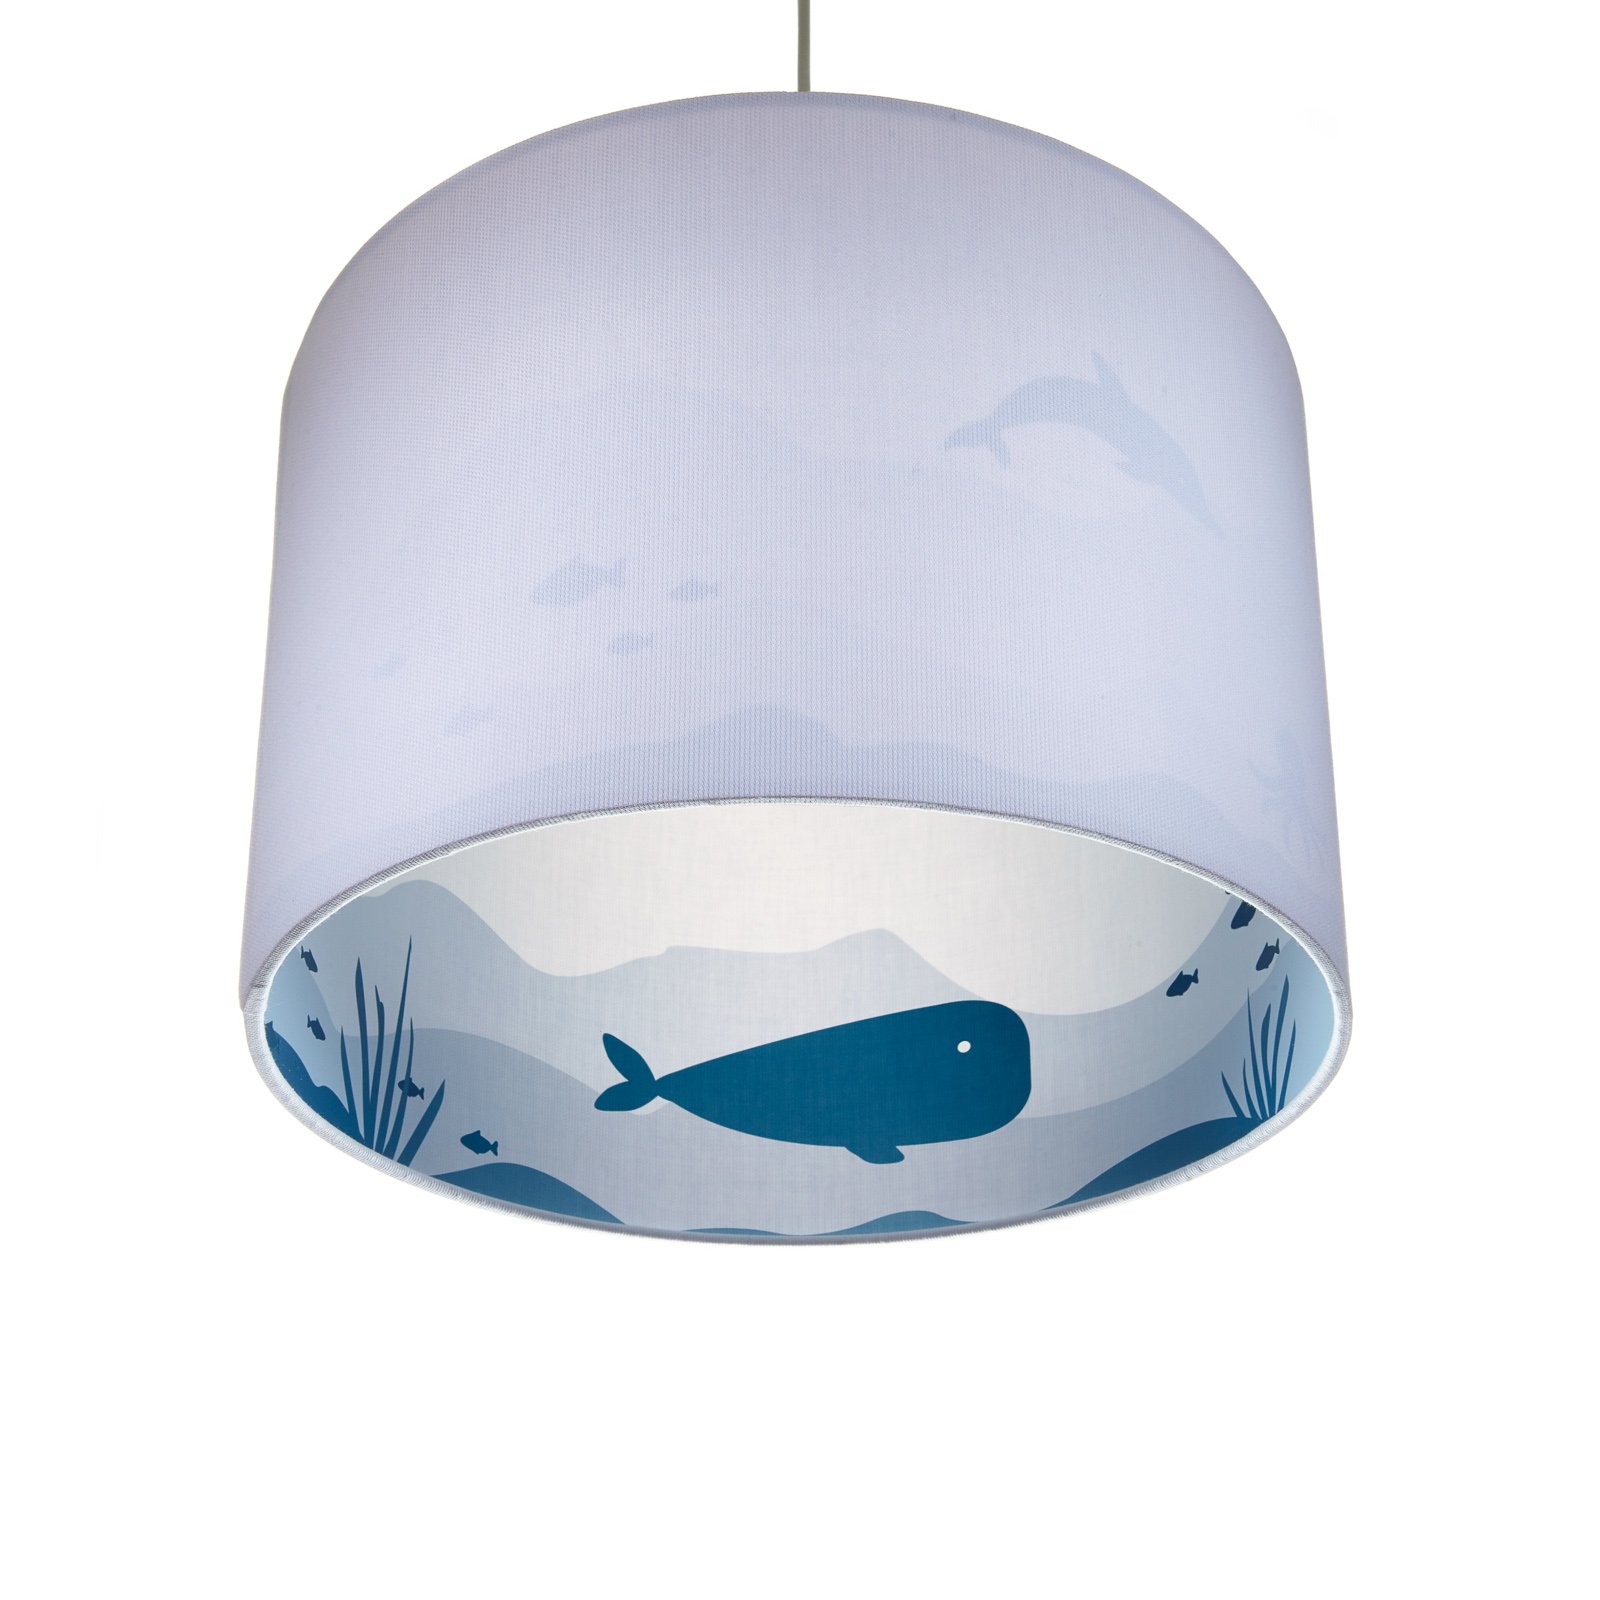 Silhouette whale pendant light in grey/blue